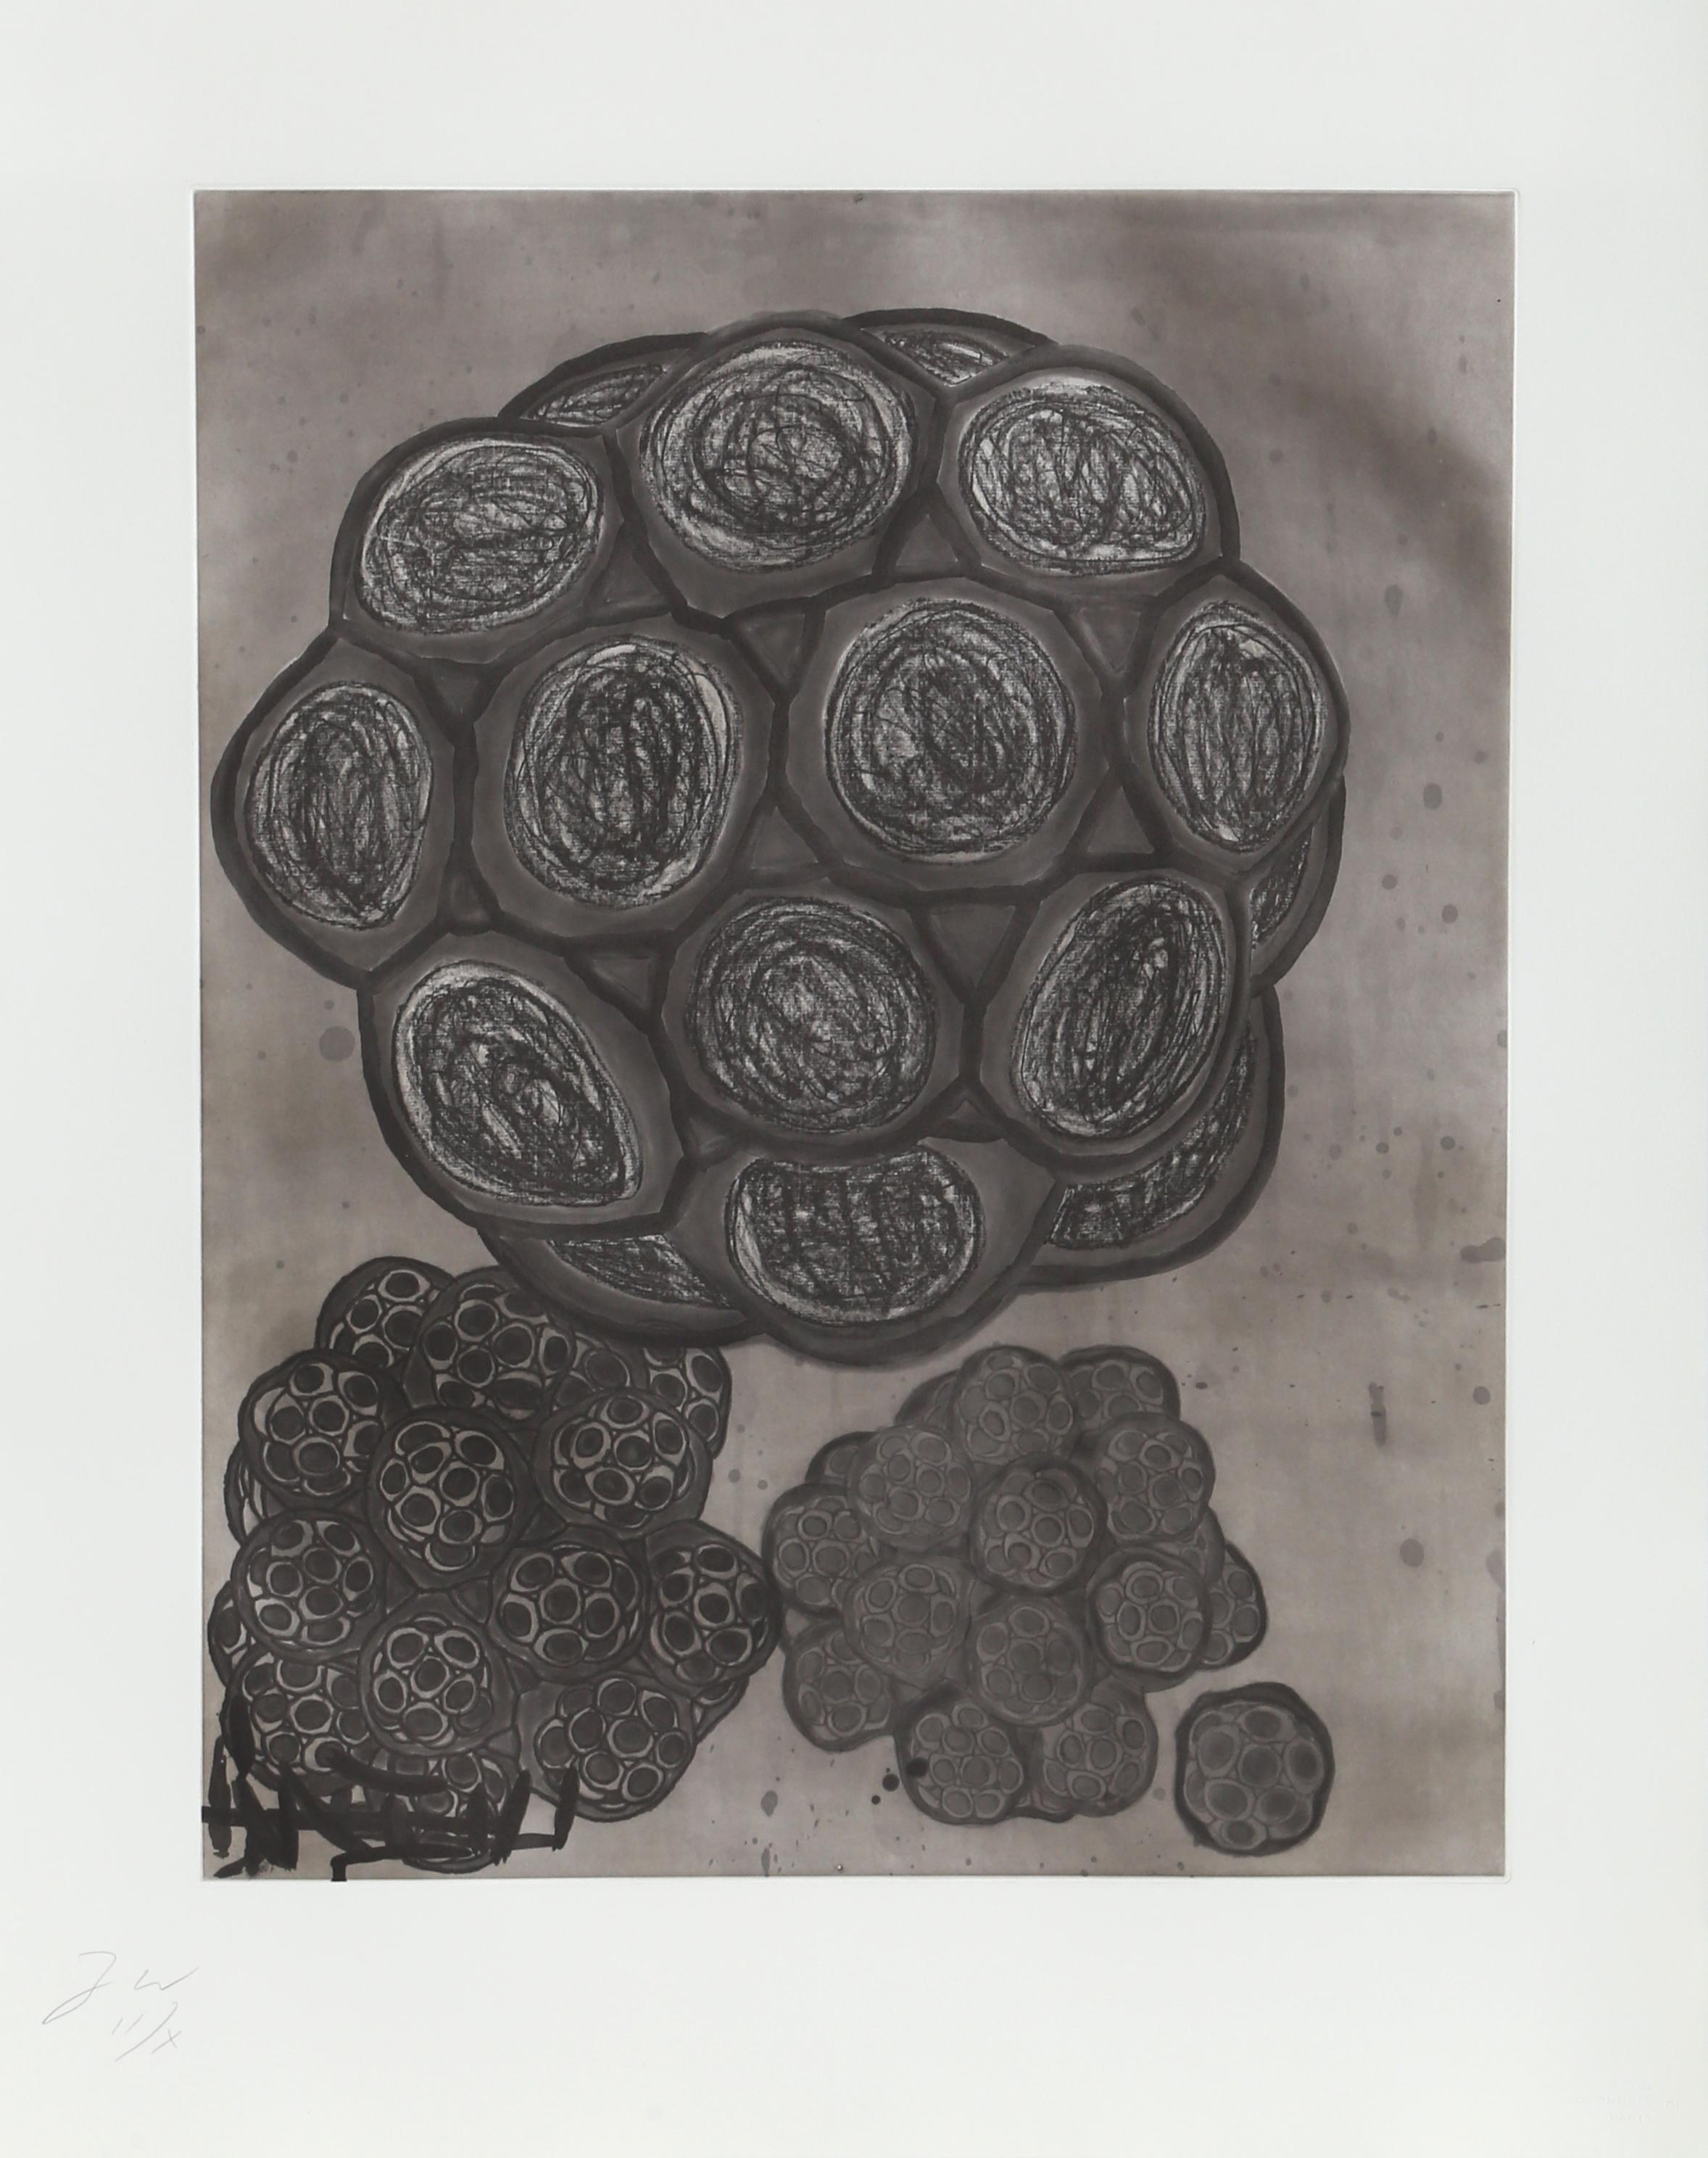 Artist: Terry Winters, American (1949 - )
Title: untitled 6 from Album
Year: 1988
Medium: Etching with Aquatint, signed and numbered in pencil
Edition: HC 2/2
Image: 20 x 16 inches
Size: 26.5  x 21 in. (67.31  x 53.34 cm)